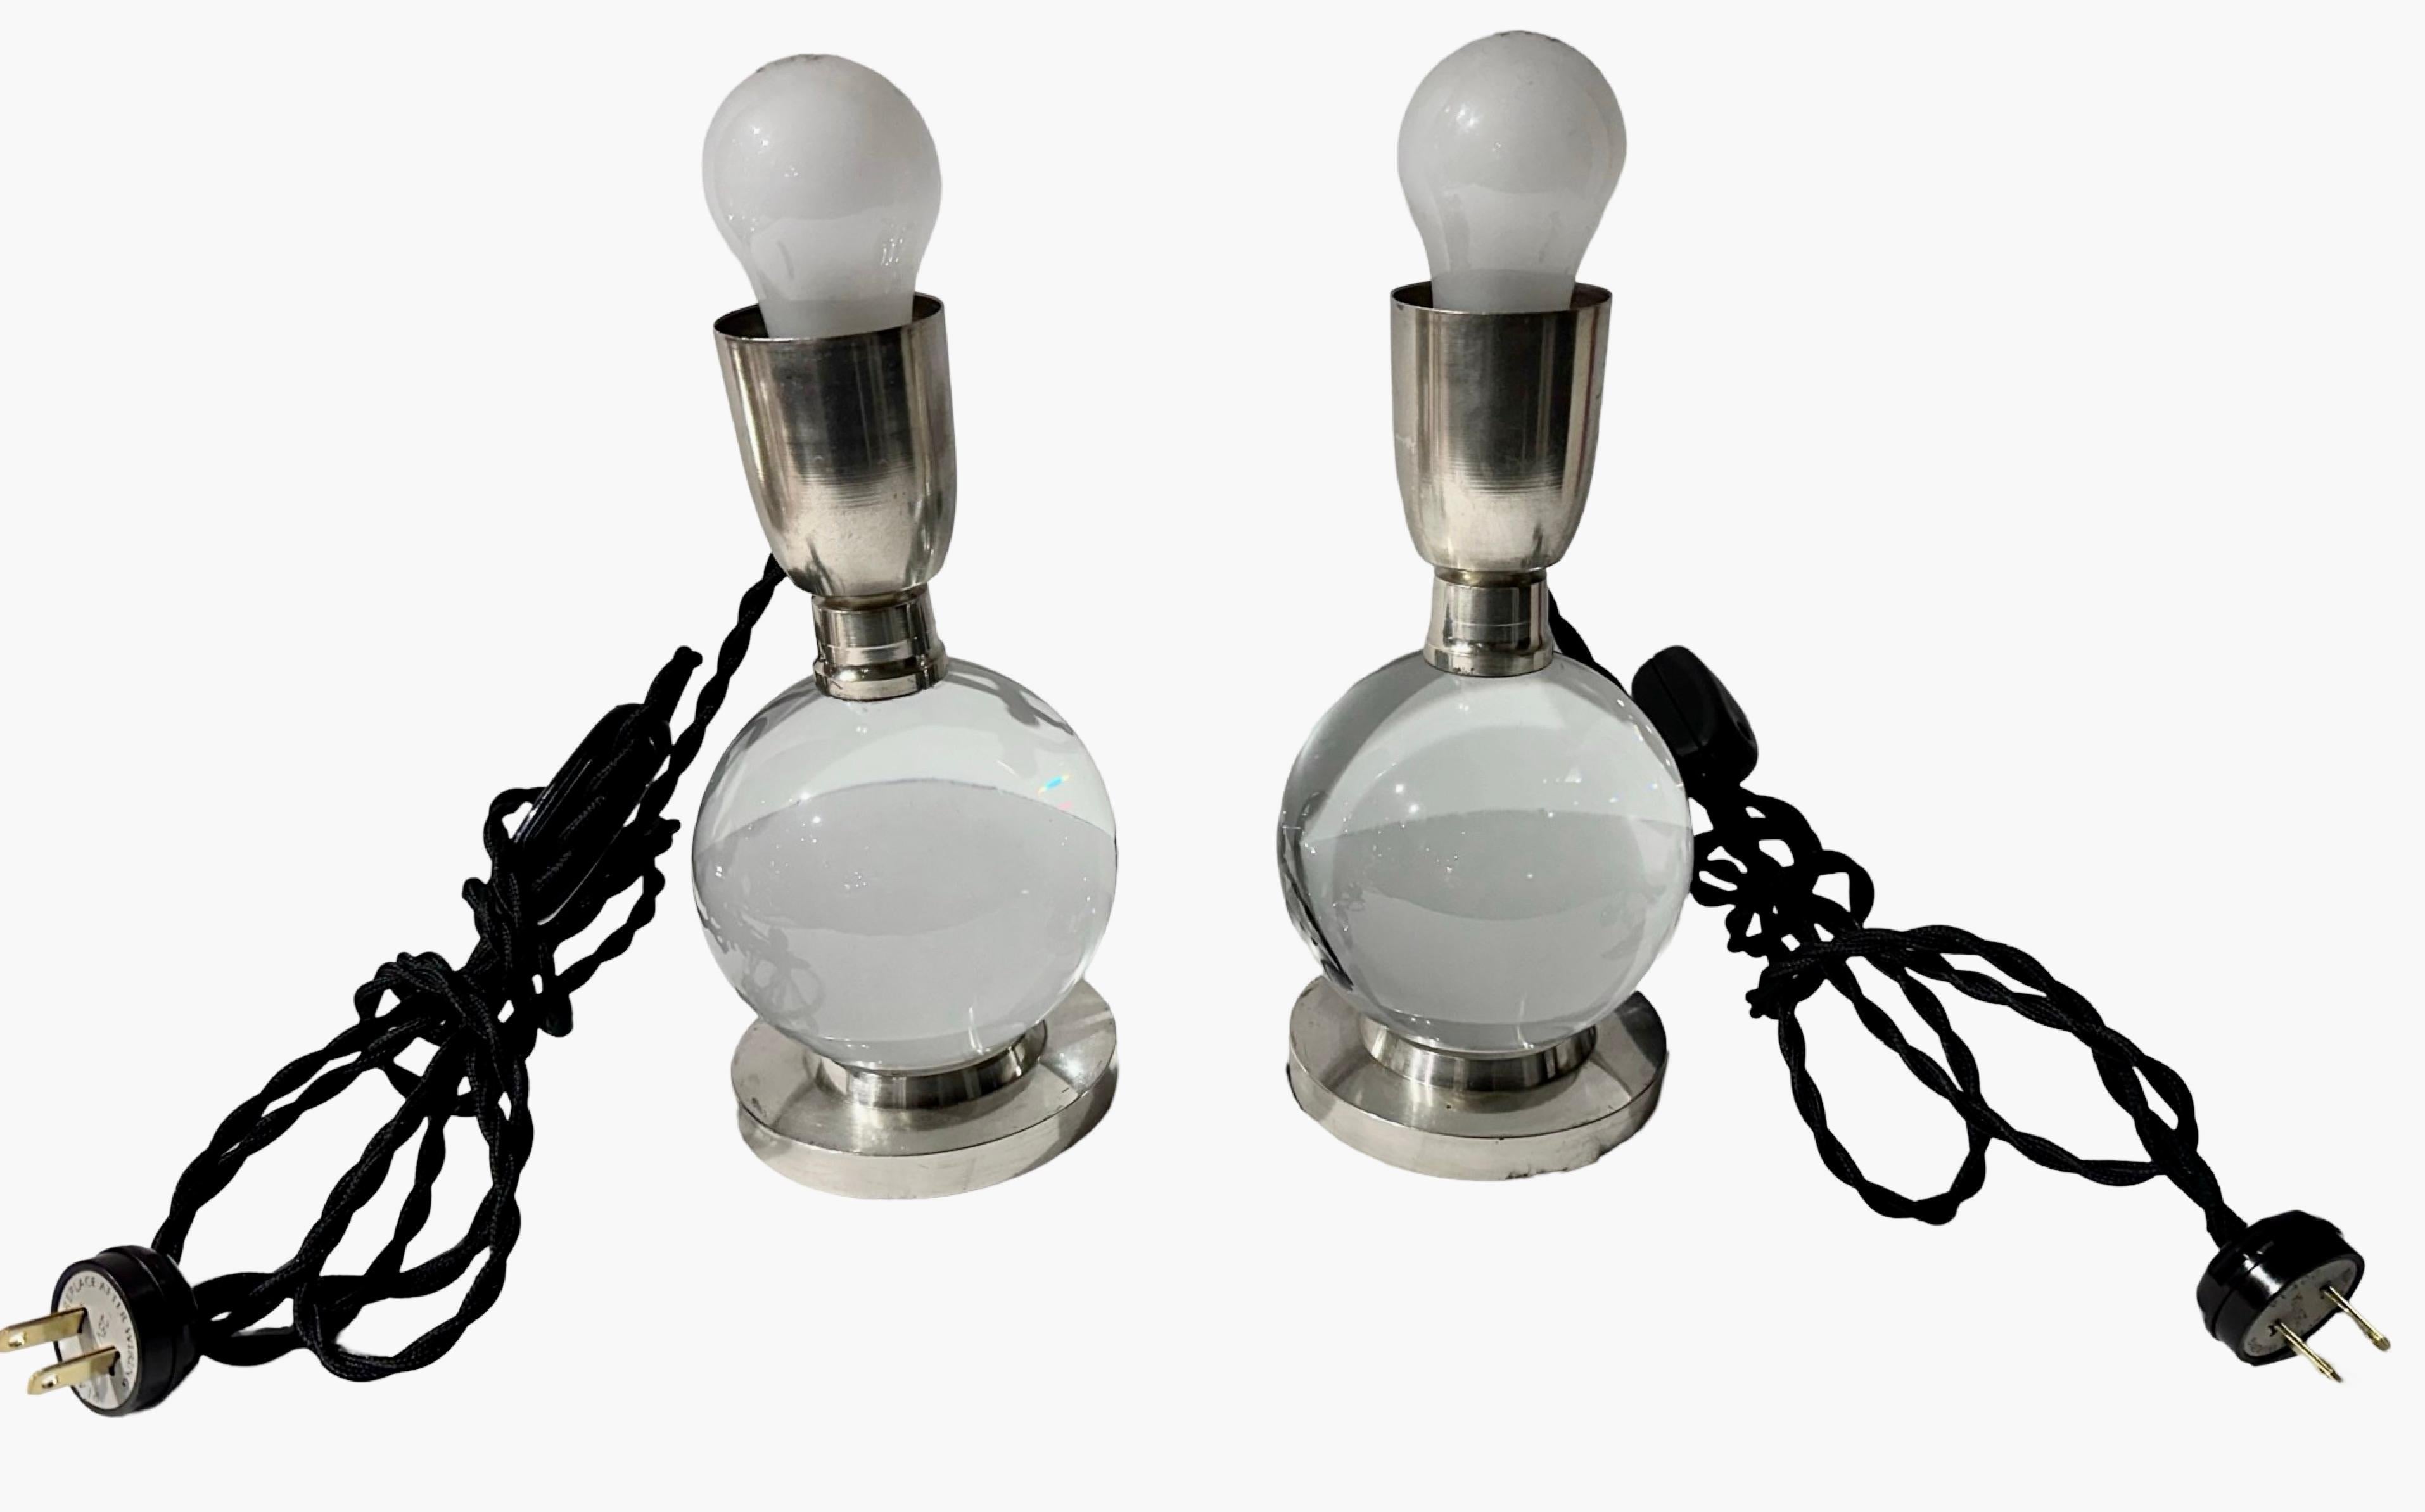 A modernist pair of Jacques Adnet lamps, designed for the Baccarat company, feature clear crystal and a nickel base. The adjustable ball allows for various positions. These lamps are dated back to the 1930s and are documented in the Adnet book